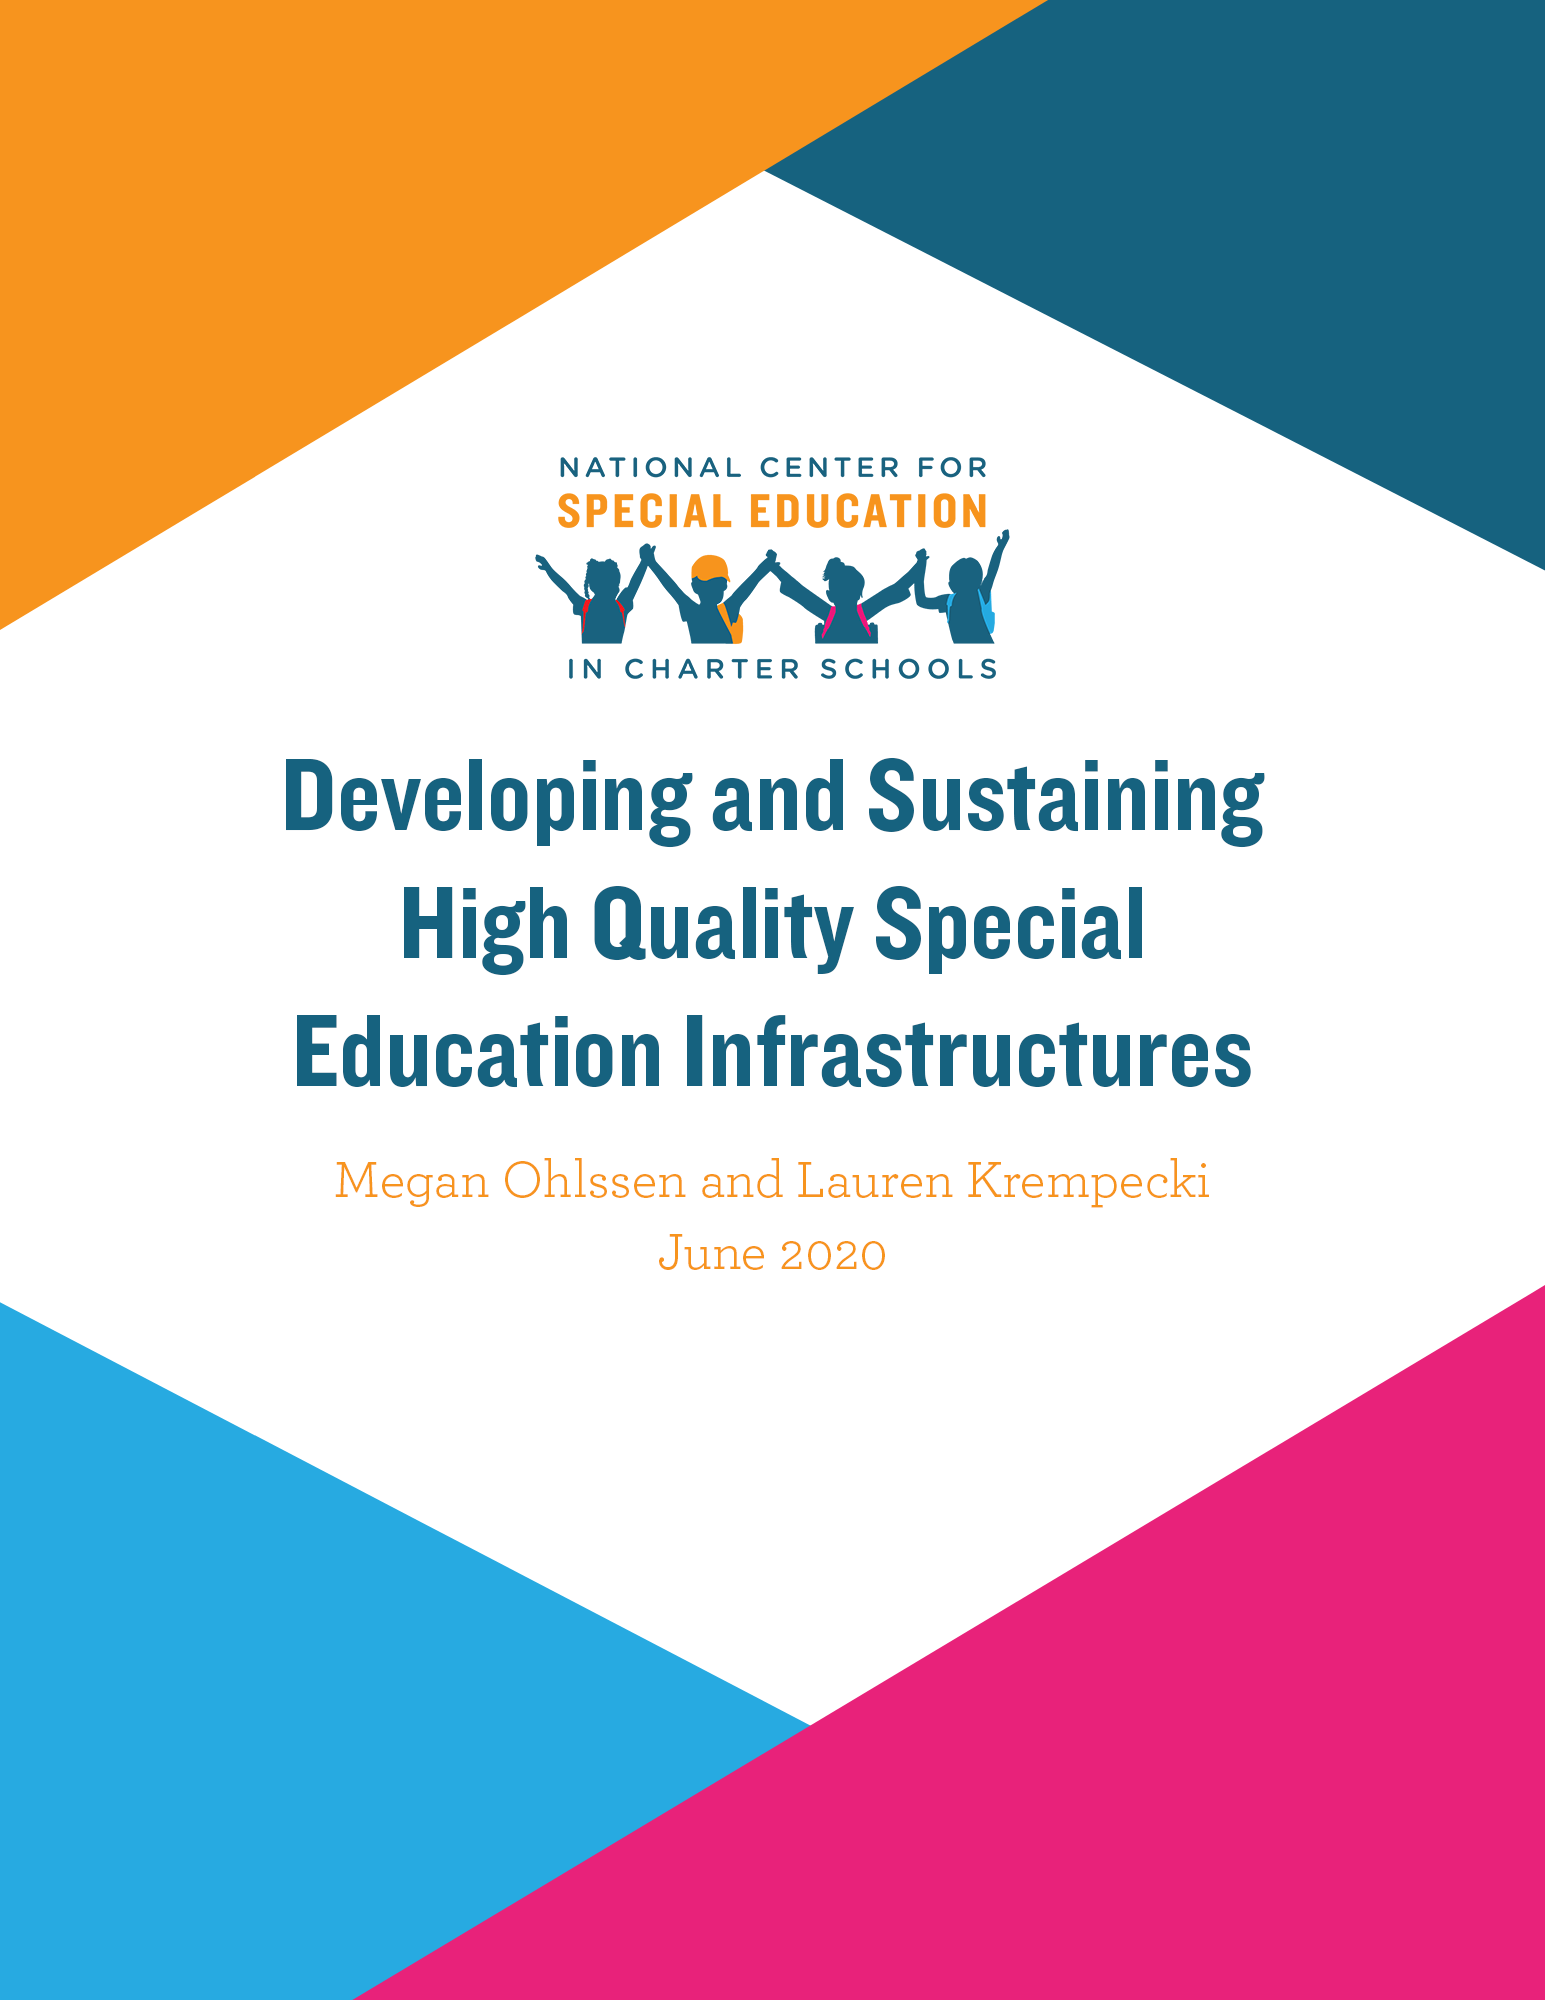 Developing and Sustaining High Quality Special Education Infrastructure